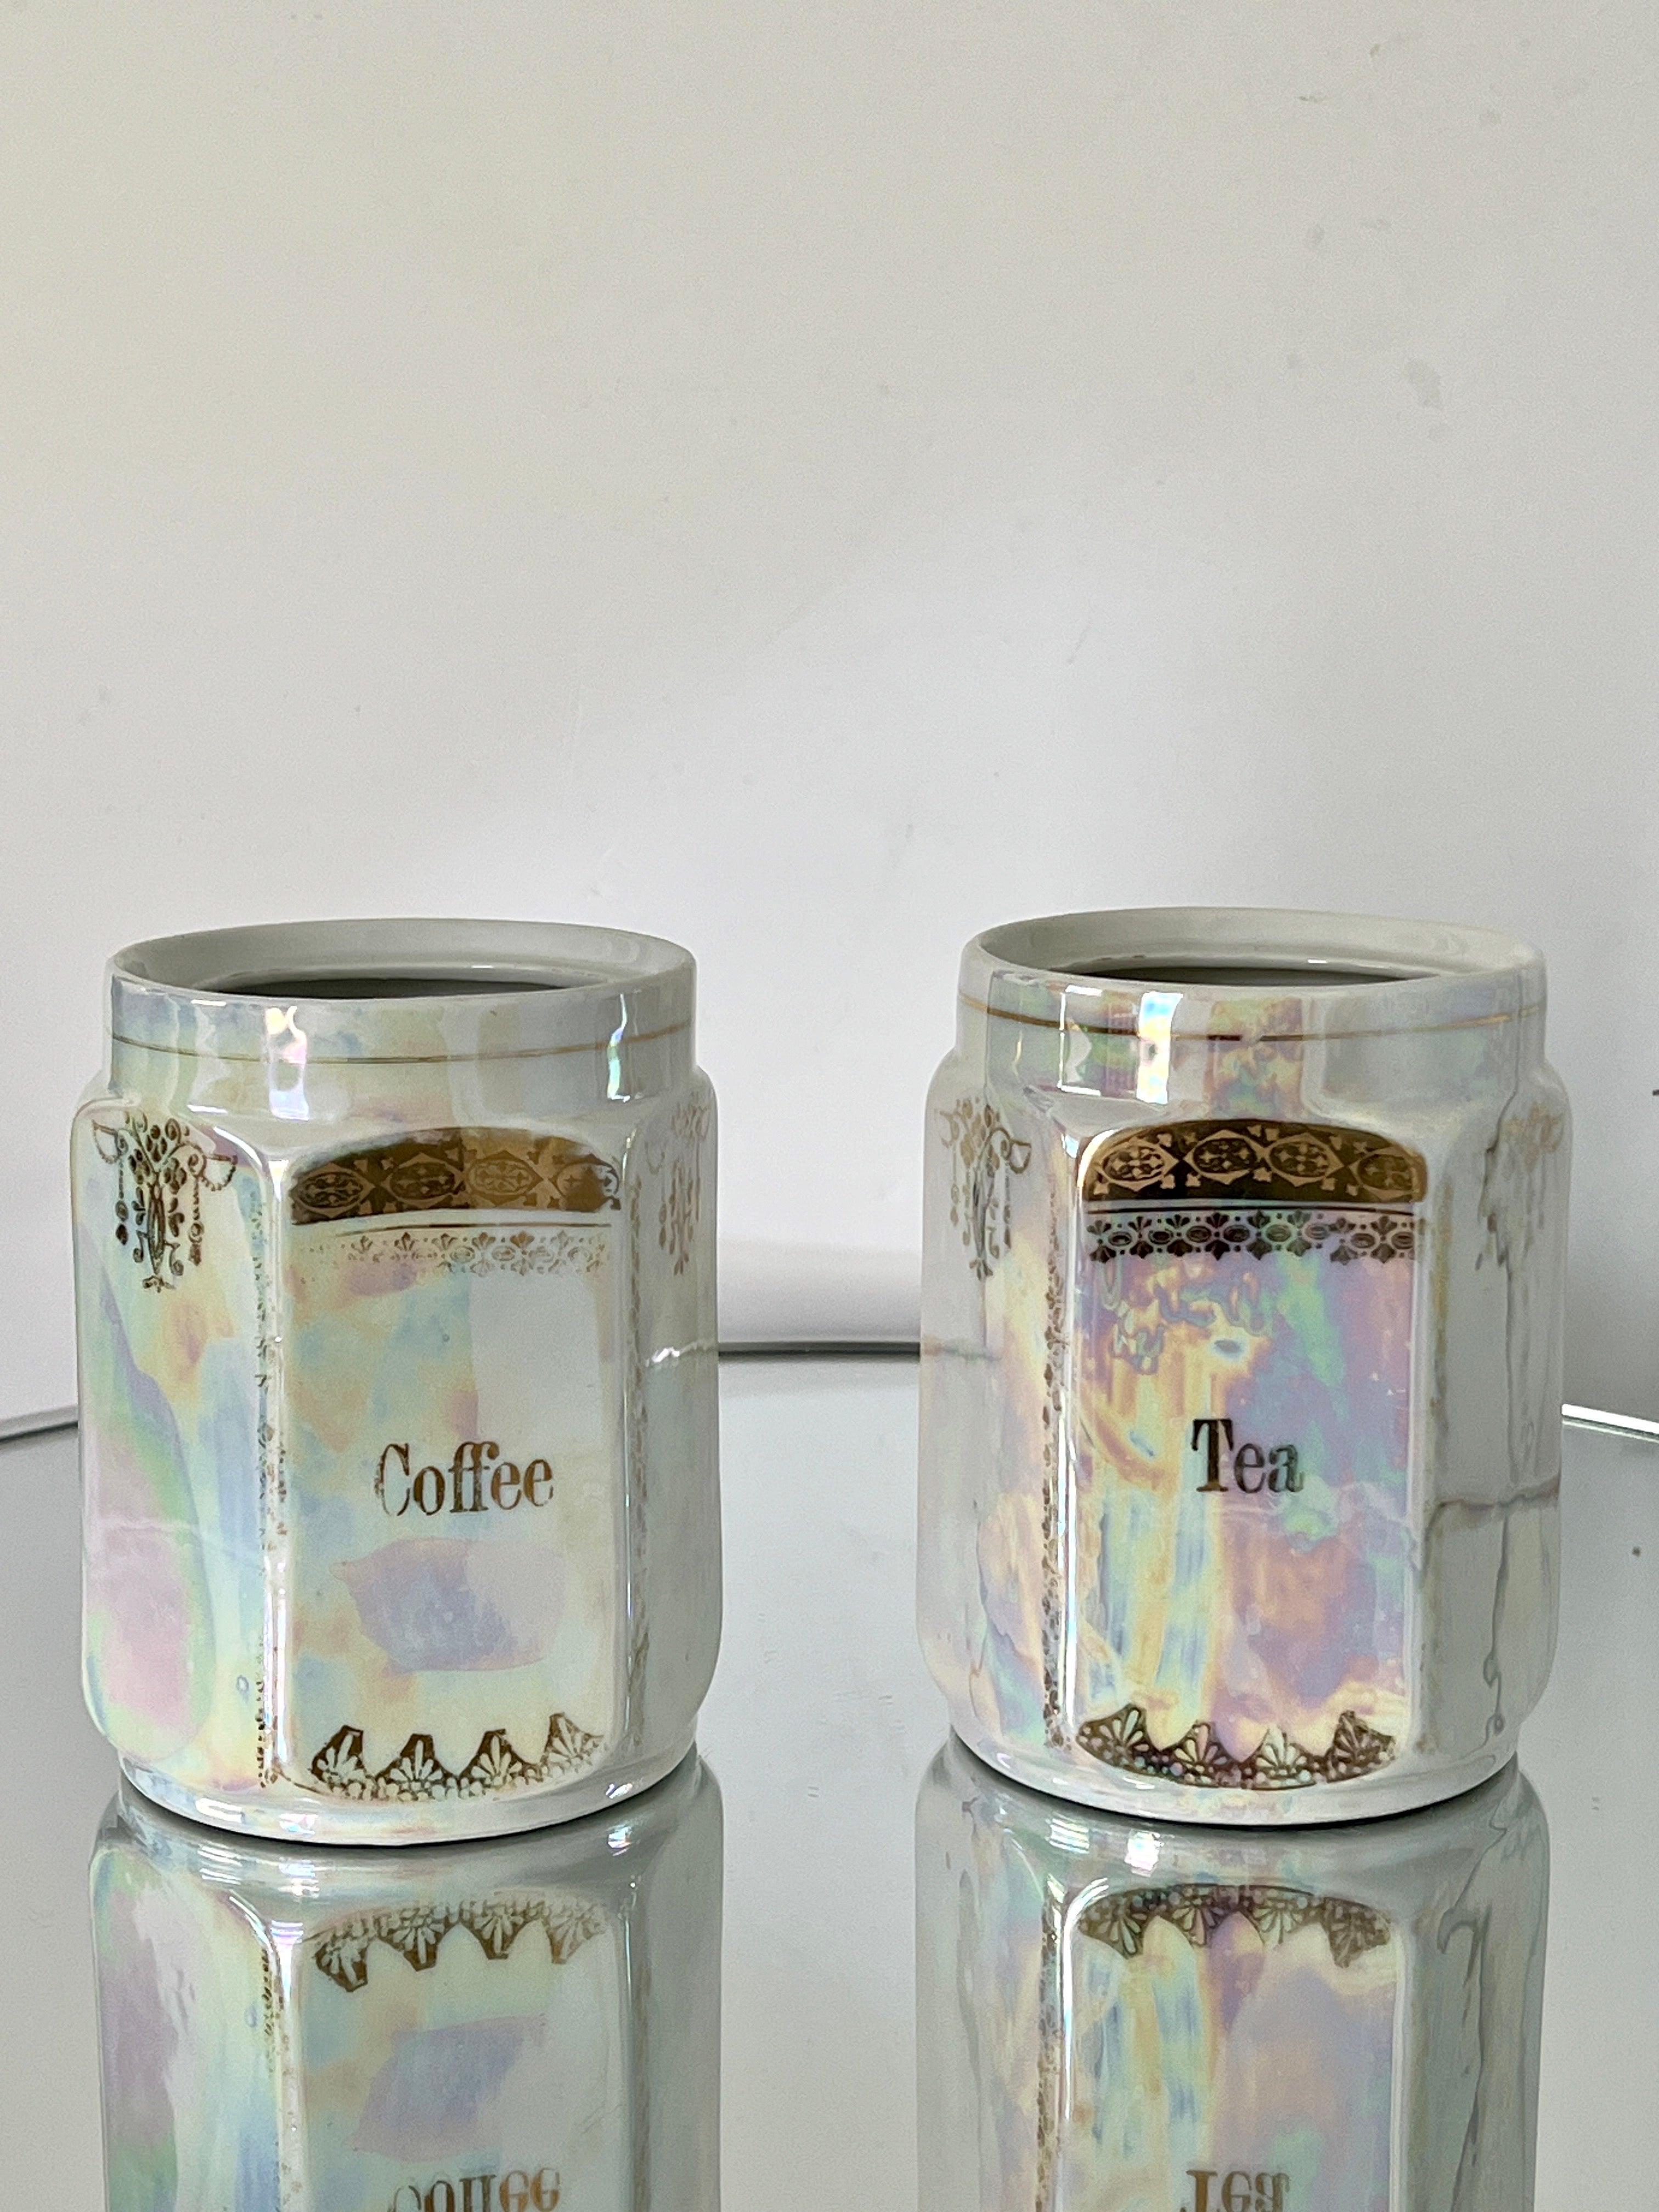 Handmade antique porcelain apothecary and spice canisters. Hand-painted in 24K gold leaf with iridescent metallic glaze or lusterware.  The coffee and tea jars have stylized floral motifs with geometric patterns. Stamped and signed Germany on